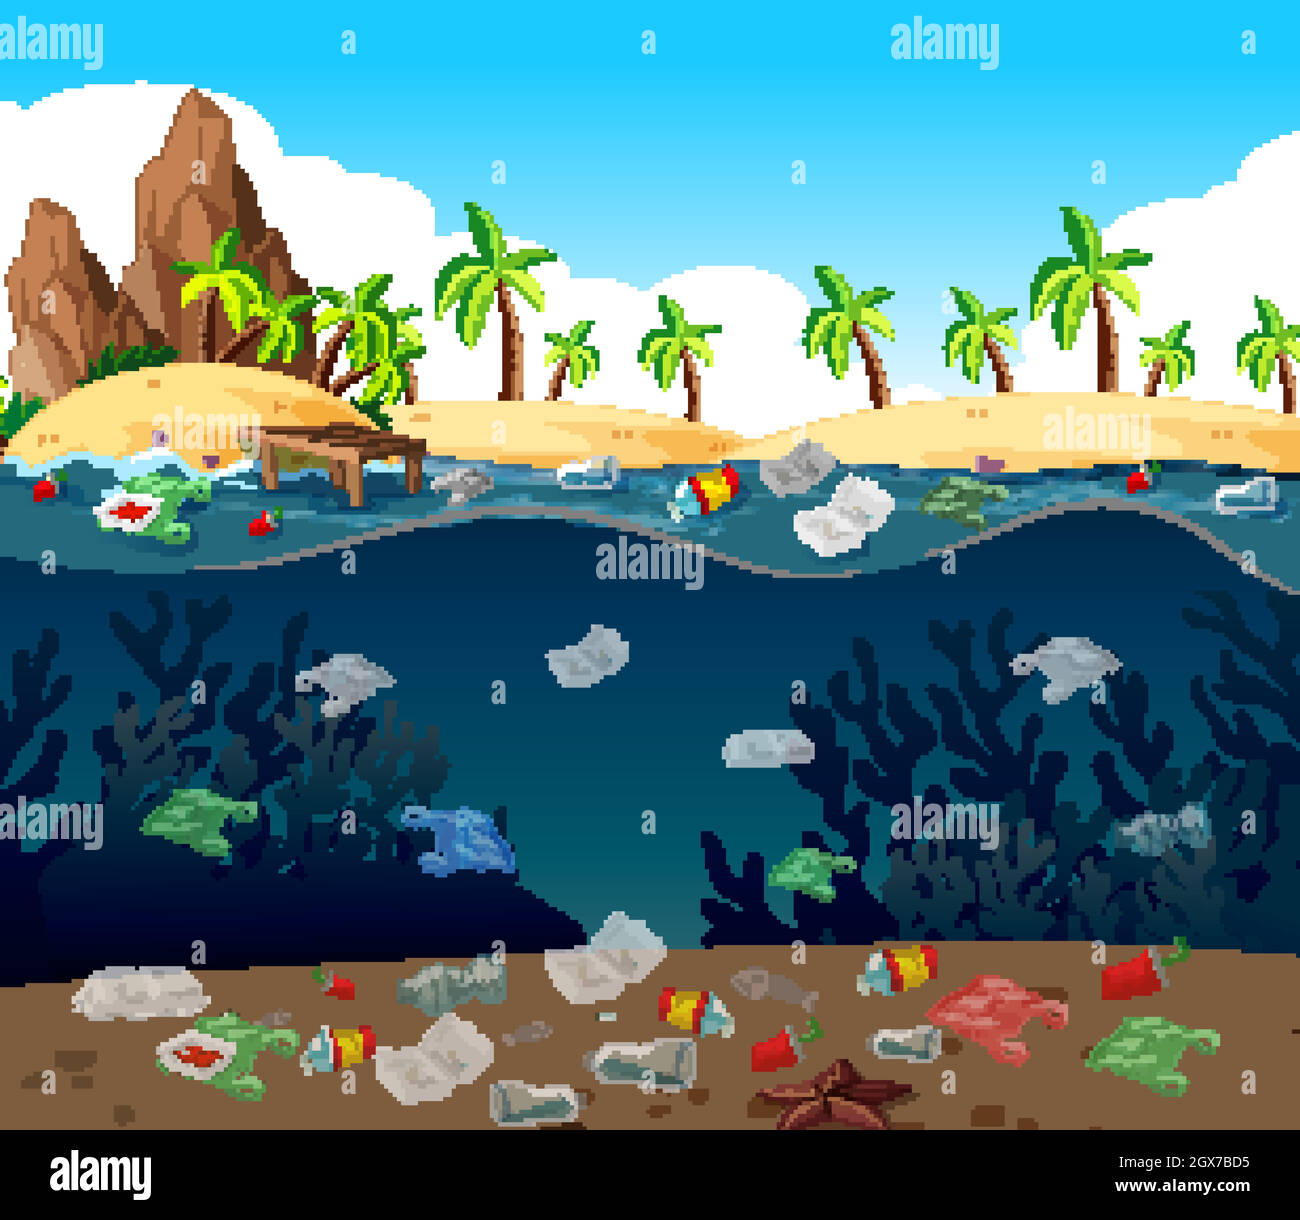 Water pollution with plastic bags in ocean Stock Vector